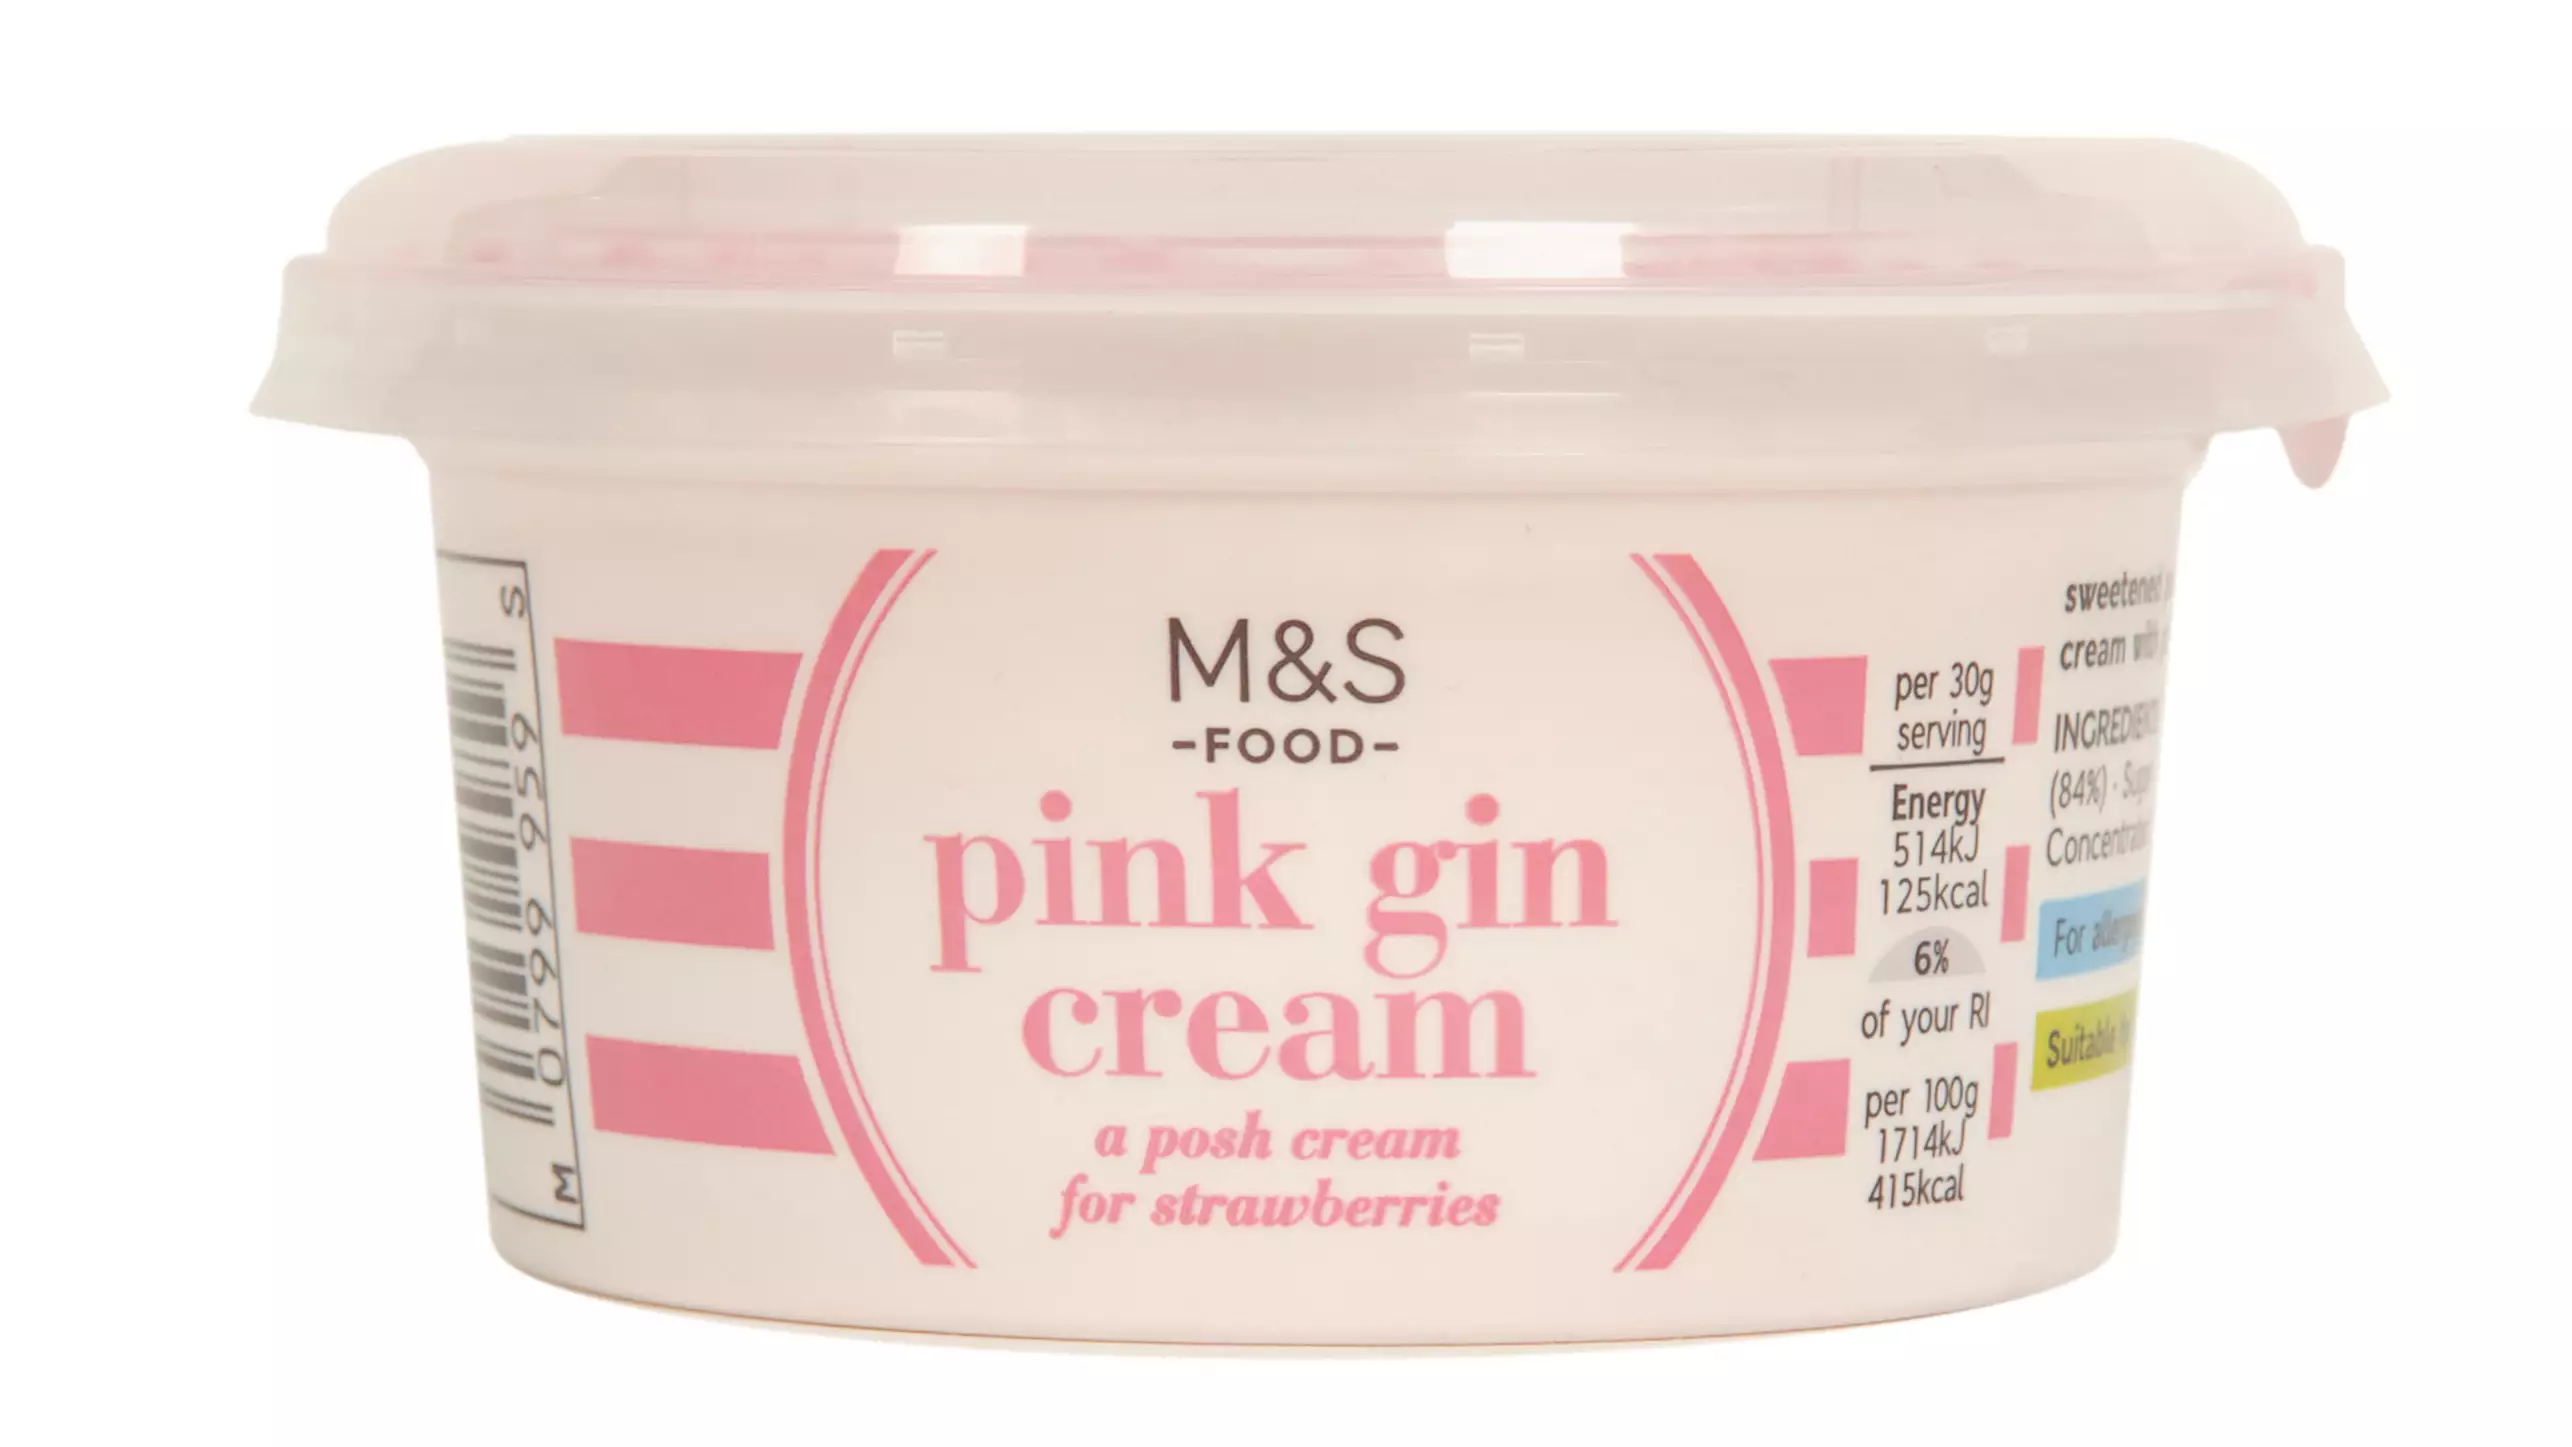 Marks & Spencer Is Selling A Pink Gin Cream Just In Time For Wimbledon